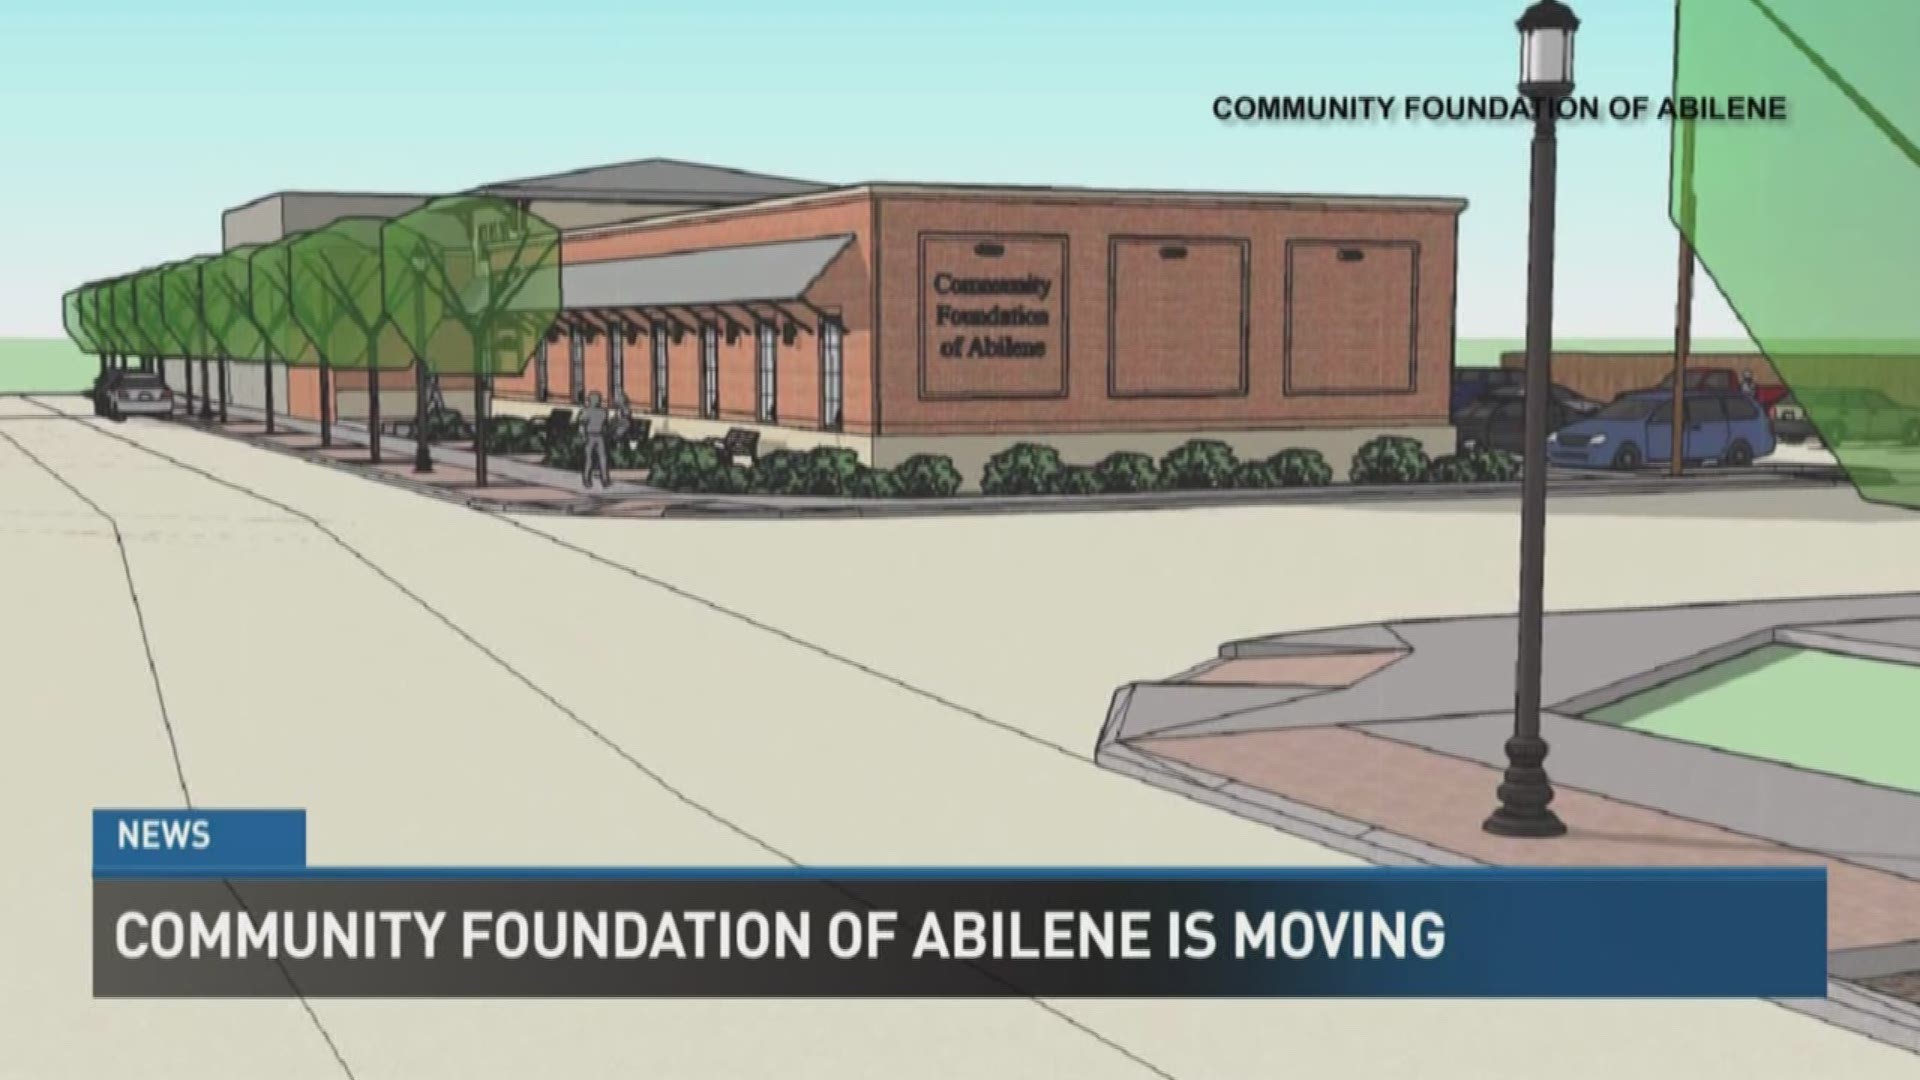 Tuesday, the Community Foundation of Abilene held a special ceremony and shared images of their new, permanent home.